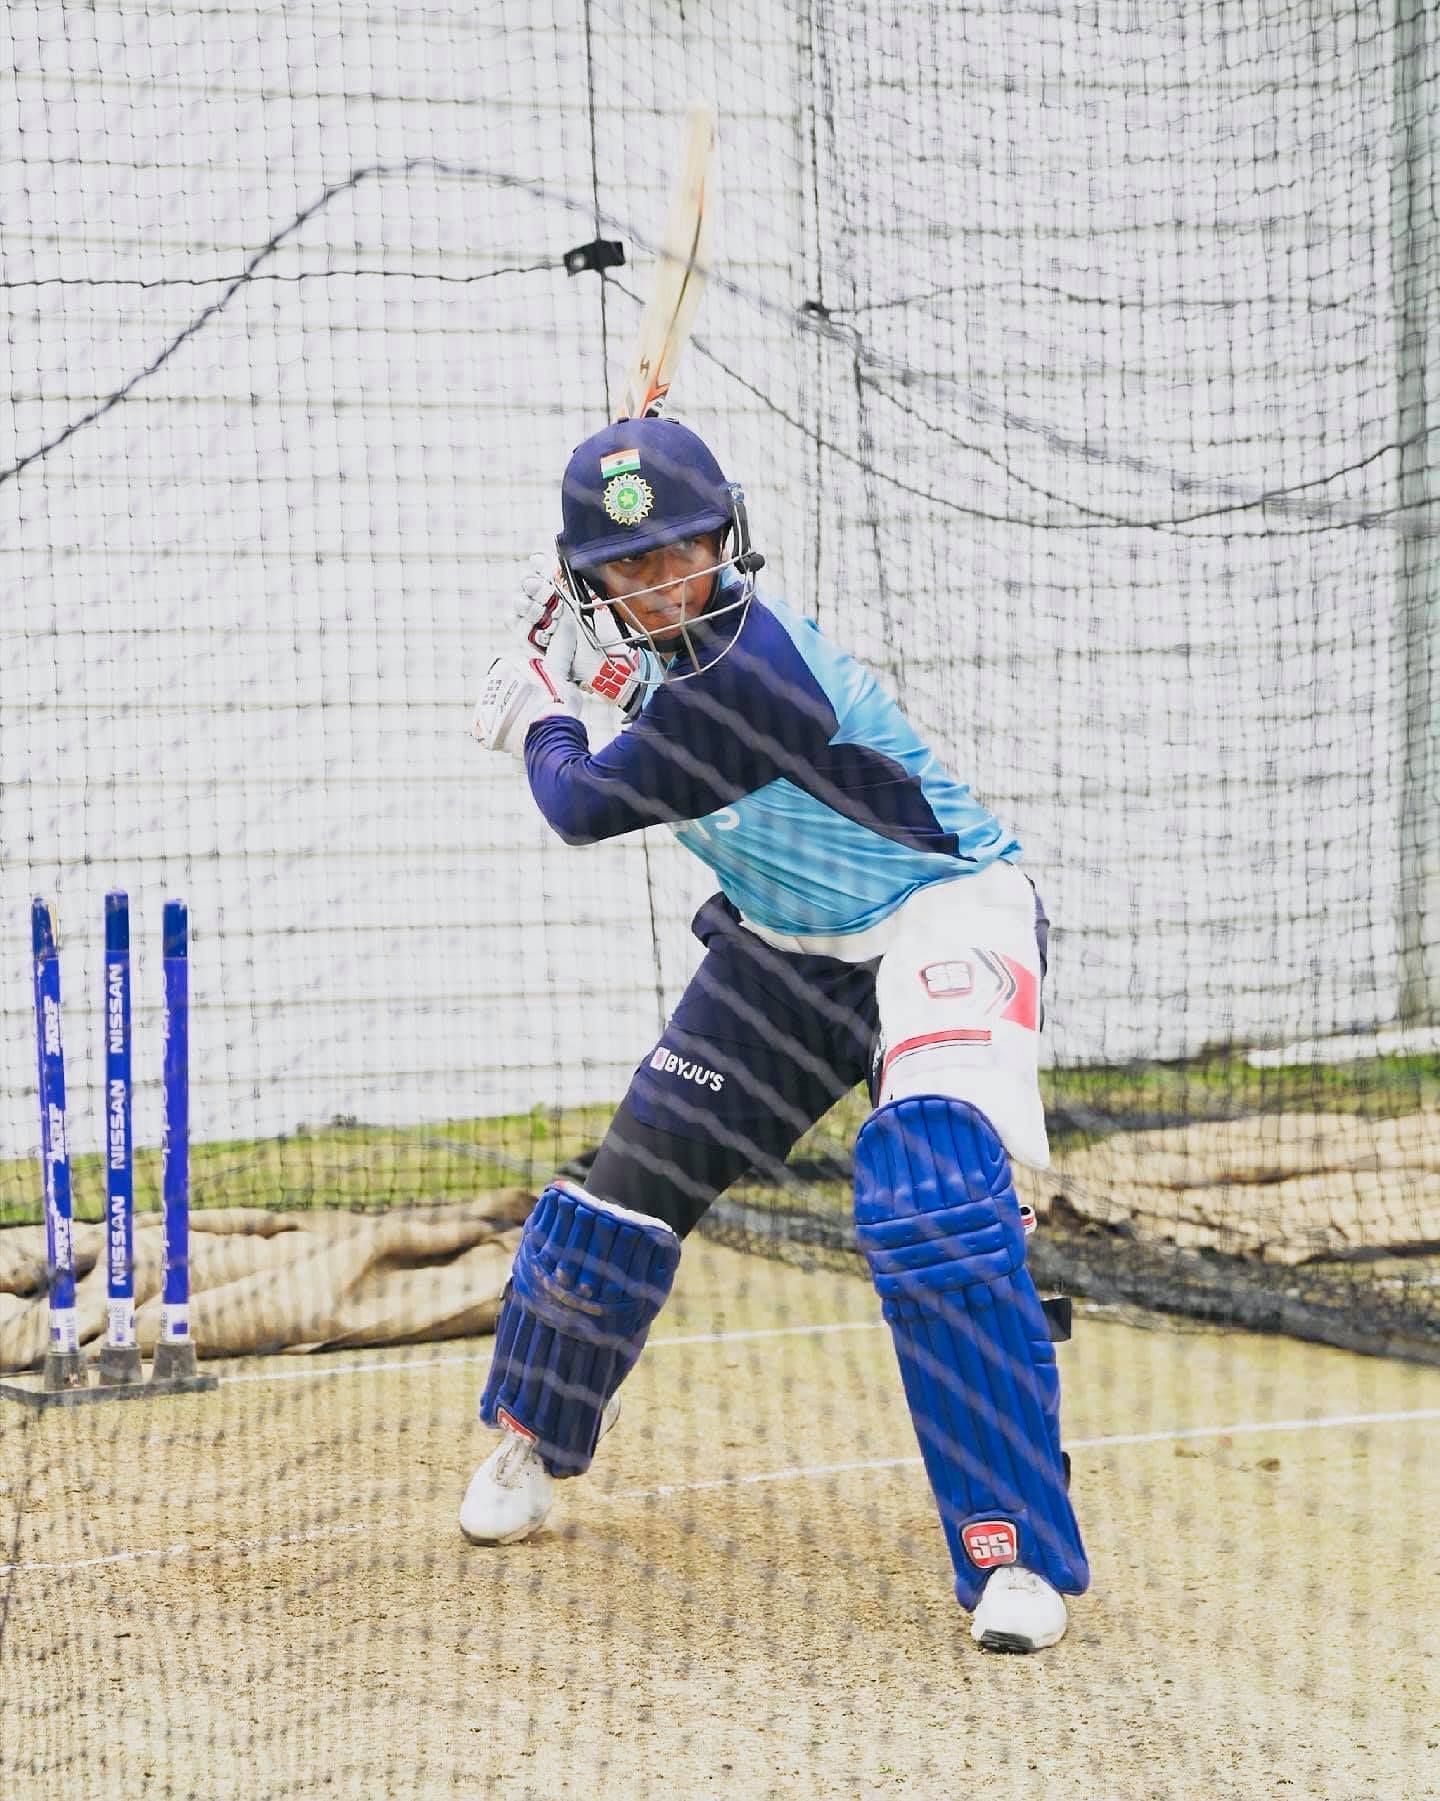 Goswami&#039;s prot&eacute;g&eacute; and Indian wicket-keeper batter Richa Ghosh (in picture) will make her World Cup debut this year. (Image: Richa Ghosh on Facebook)